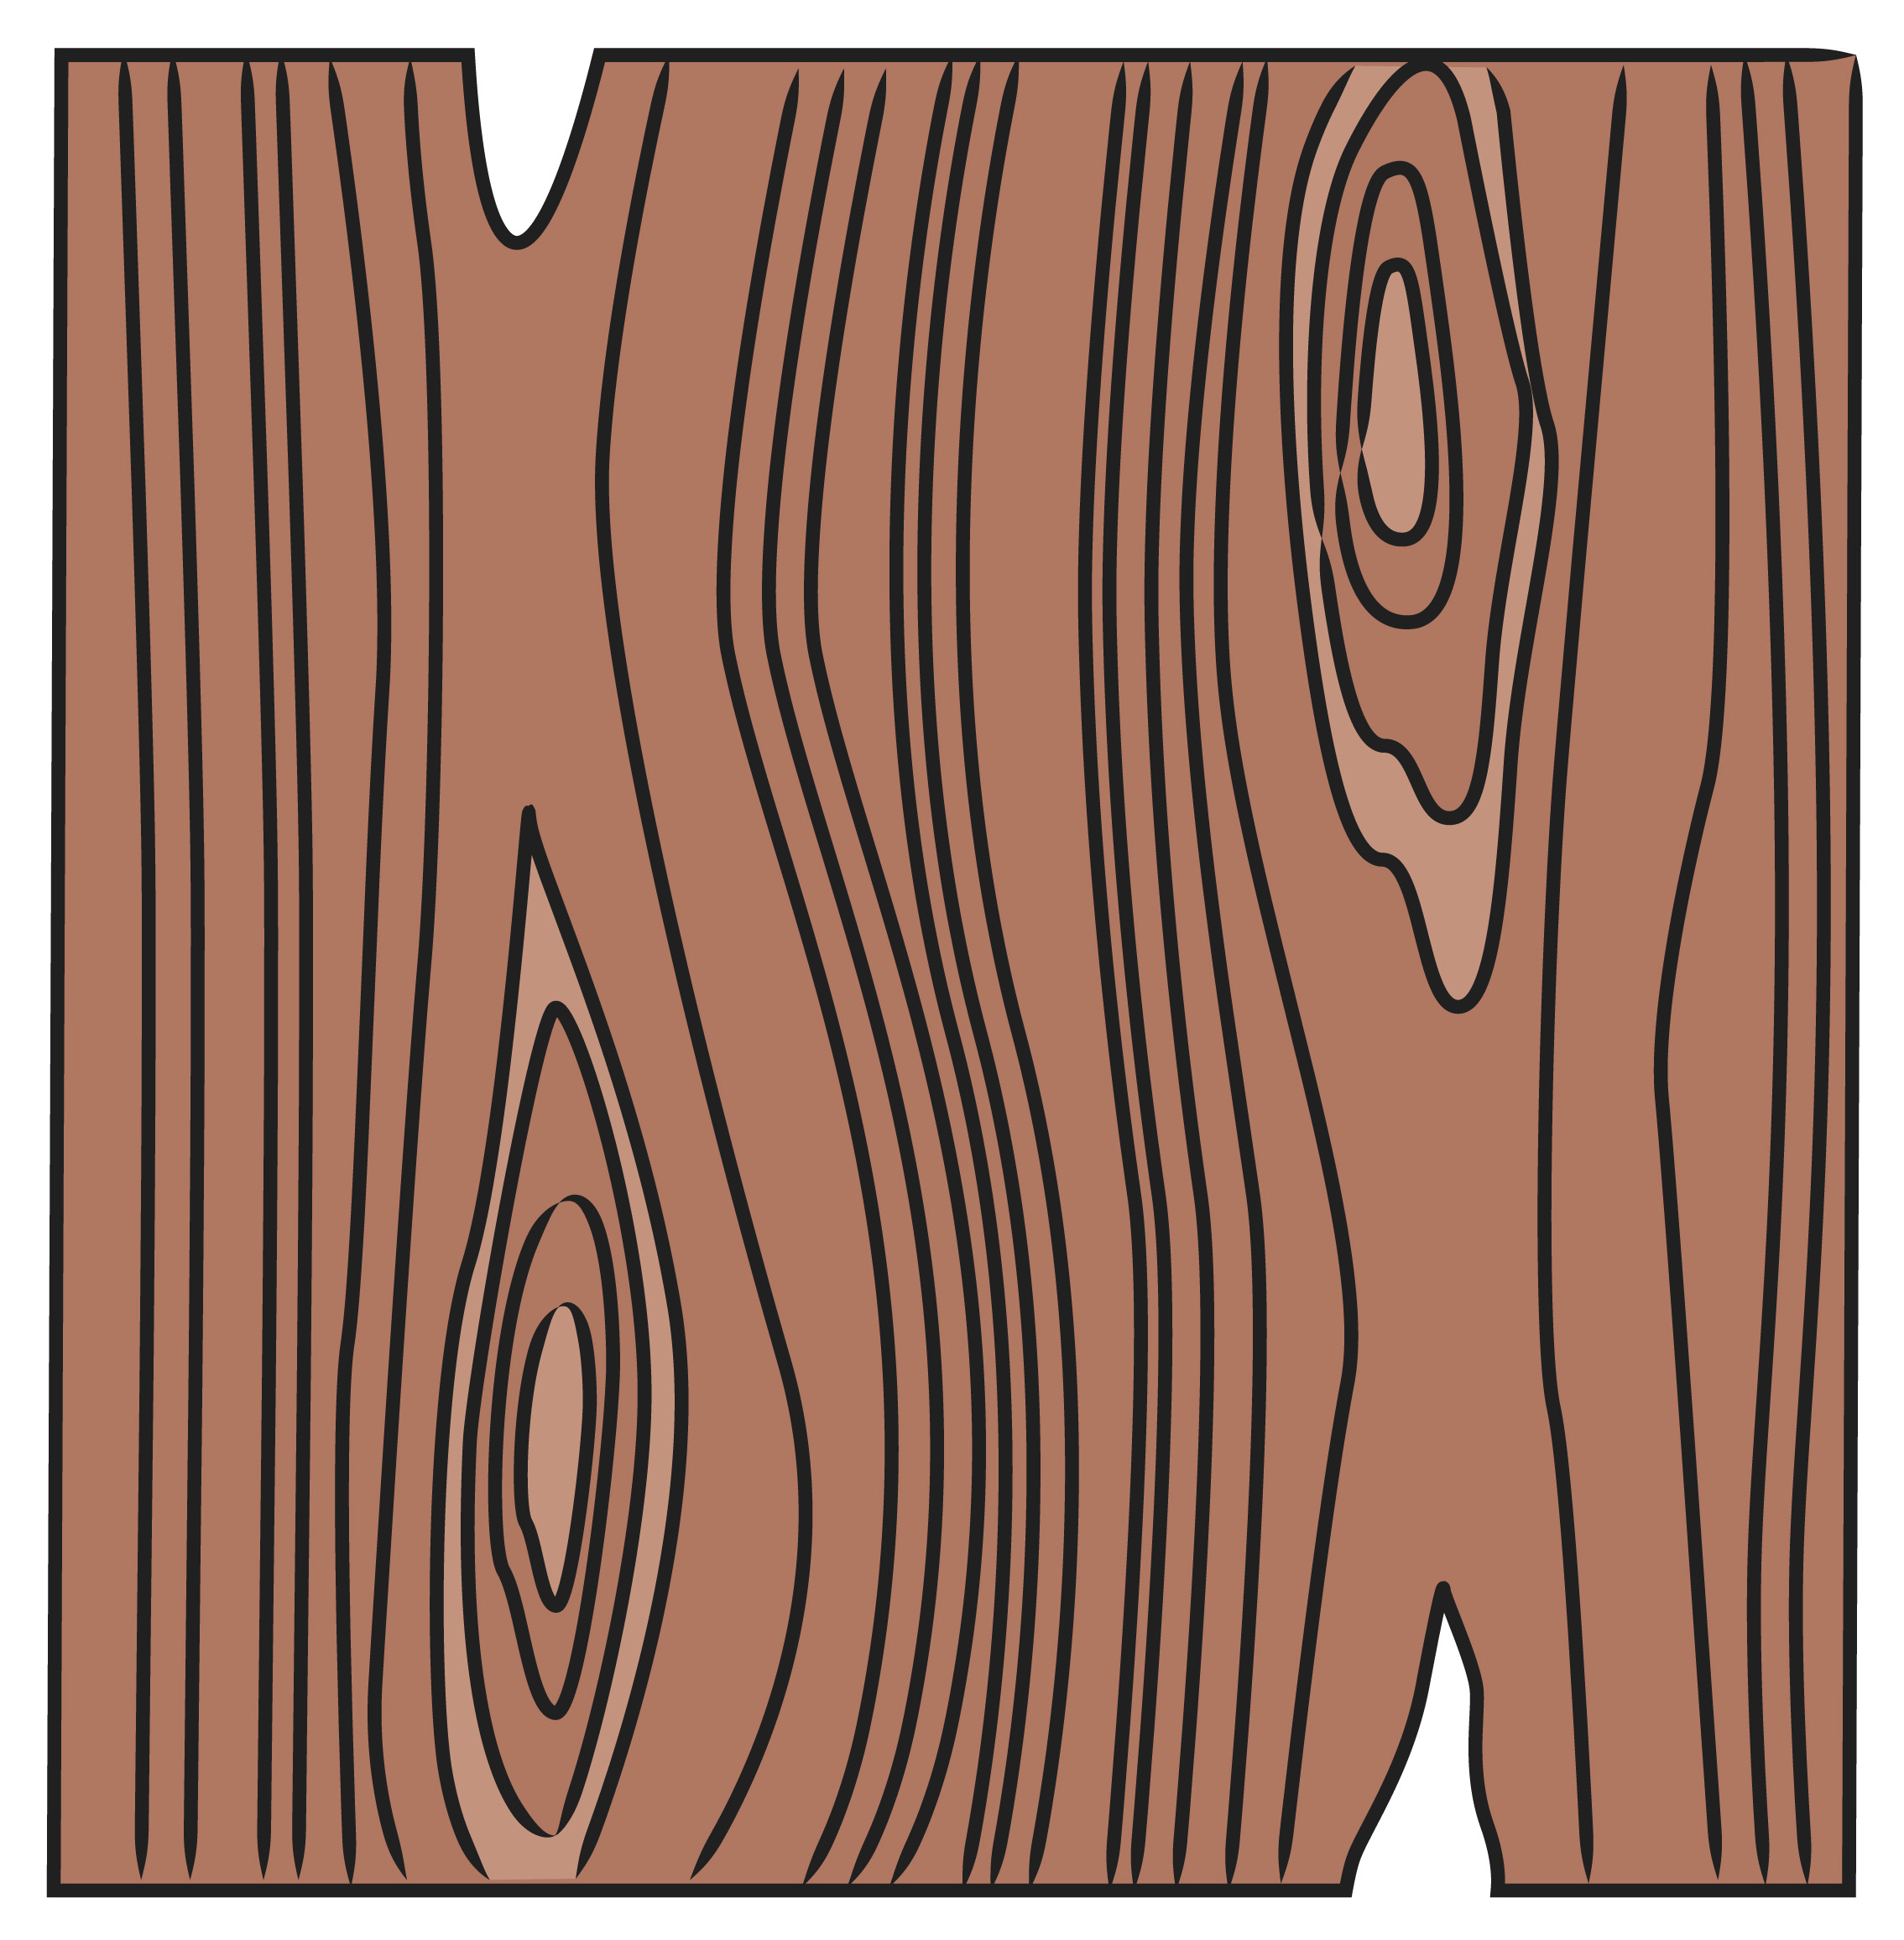 Wood Grain Drawing at Free for personal